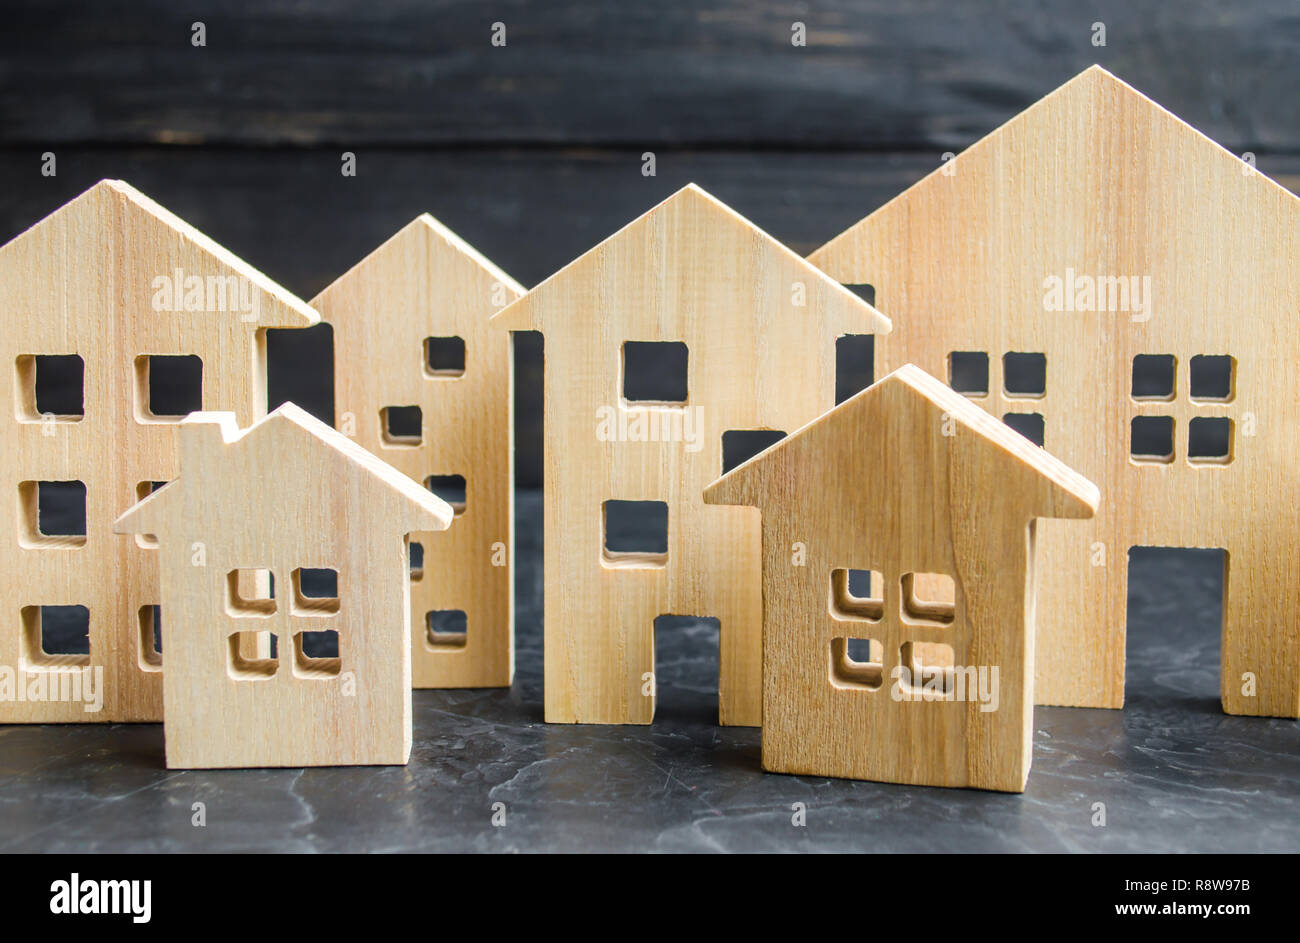 Wooden city and houses. concept of rising prices for housing or rent. Growing demand for housing and real estate. The growth of the city and its popul Stock Photo